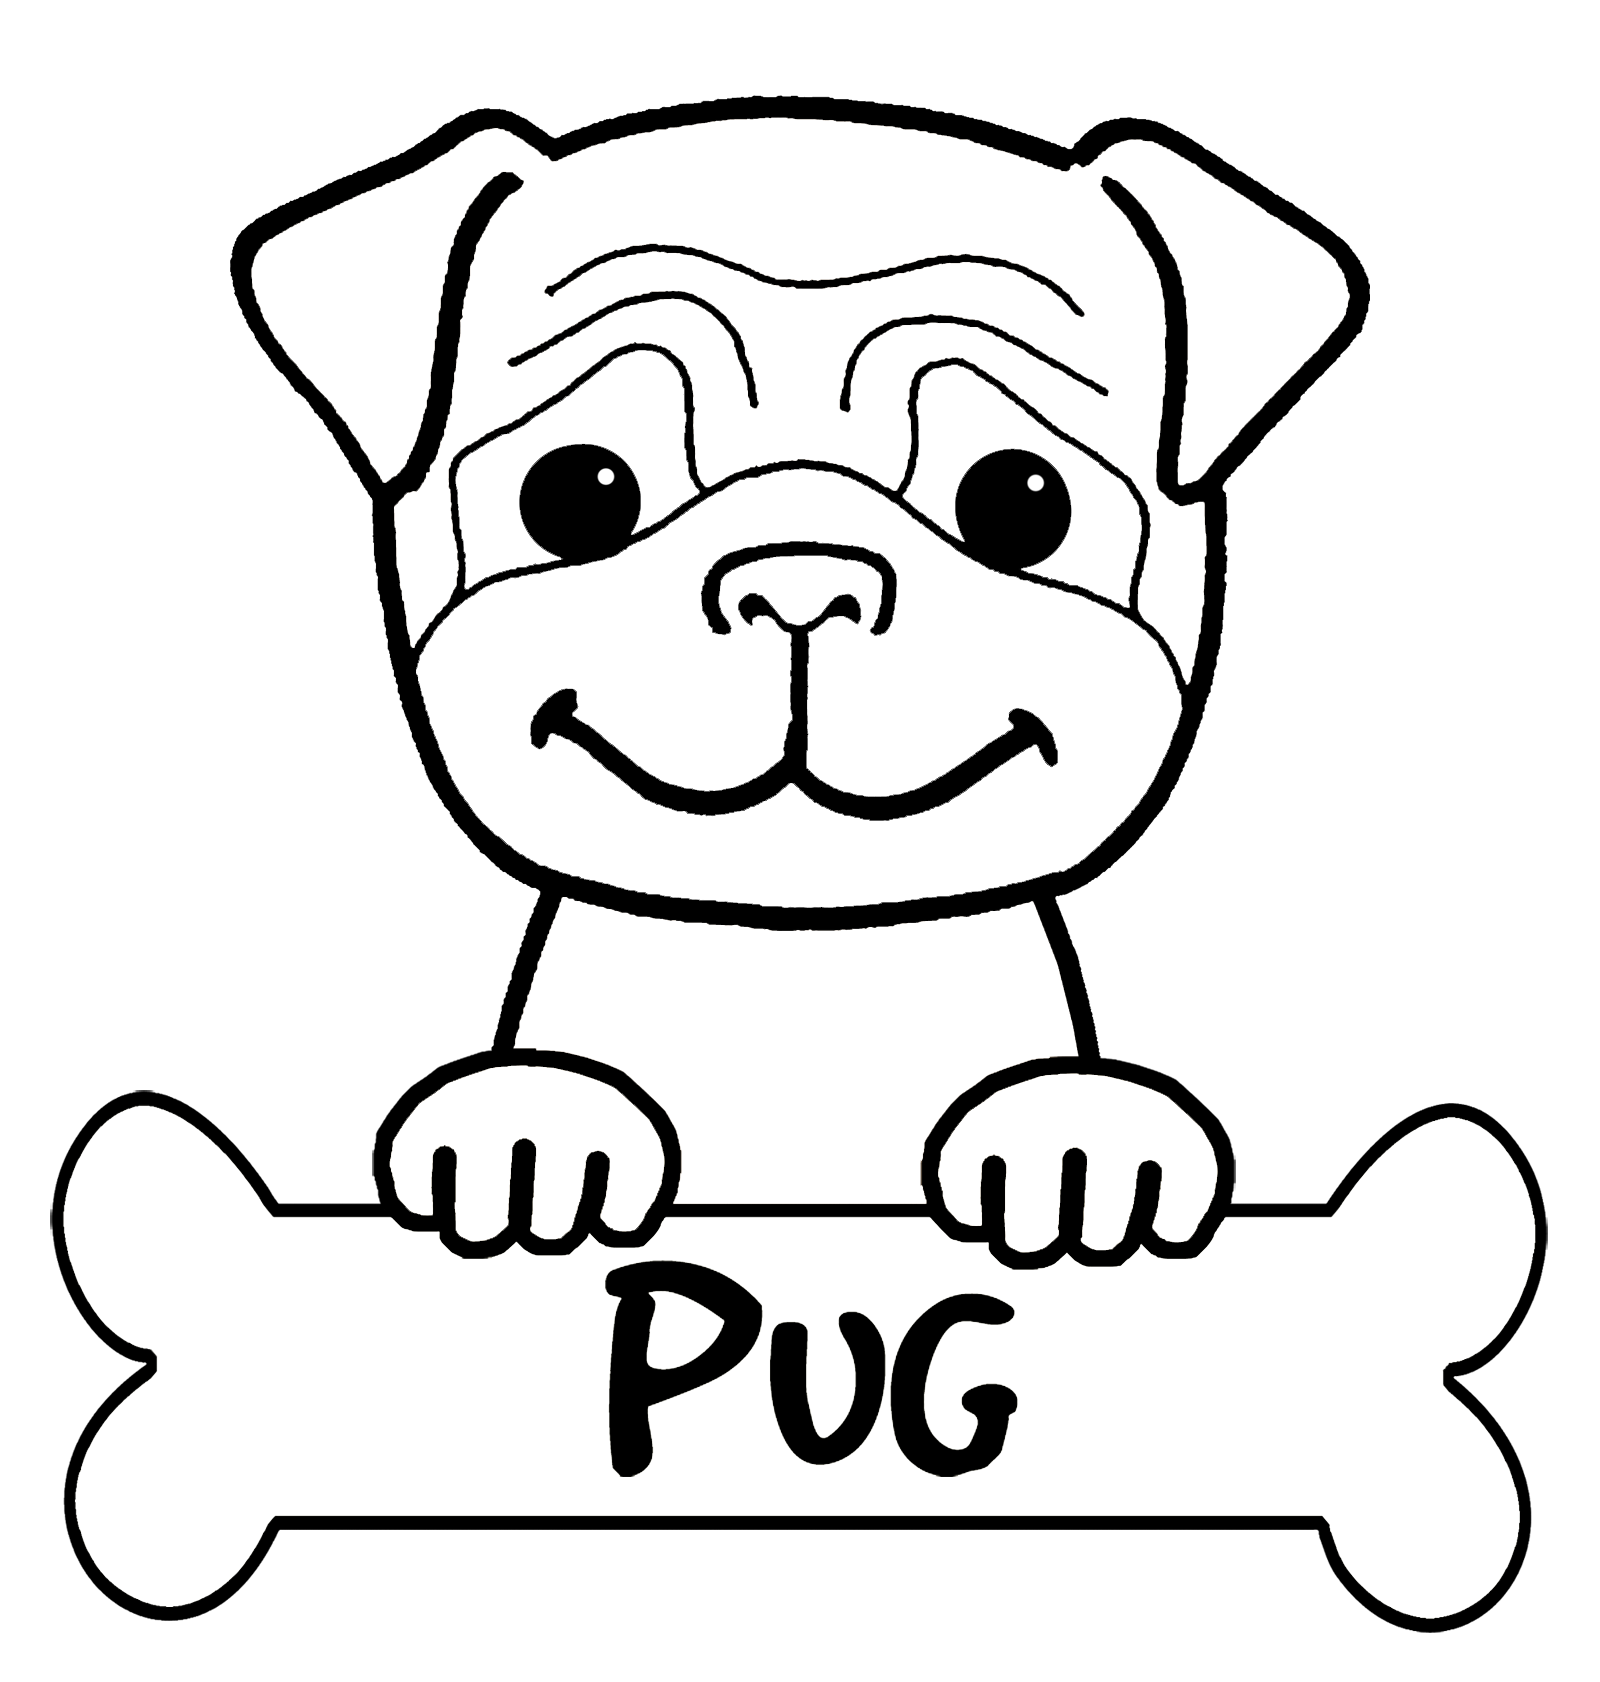 puppies-coloring-pages-printable-printable-templates